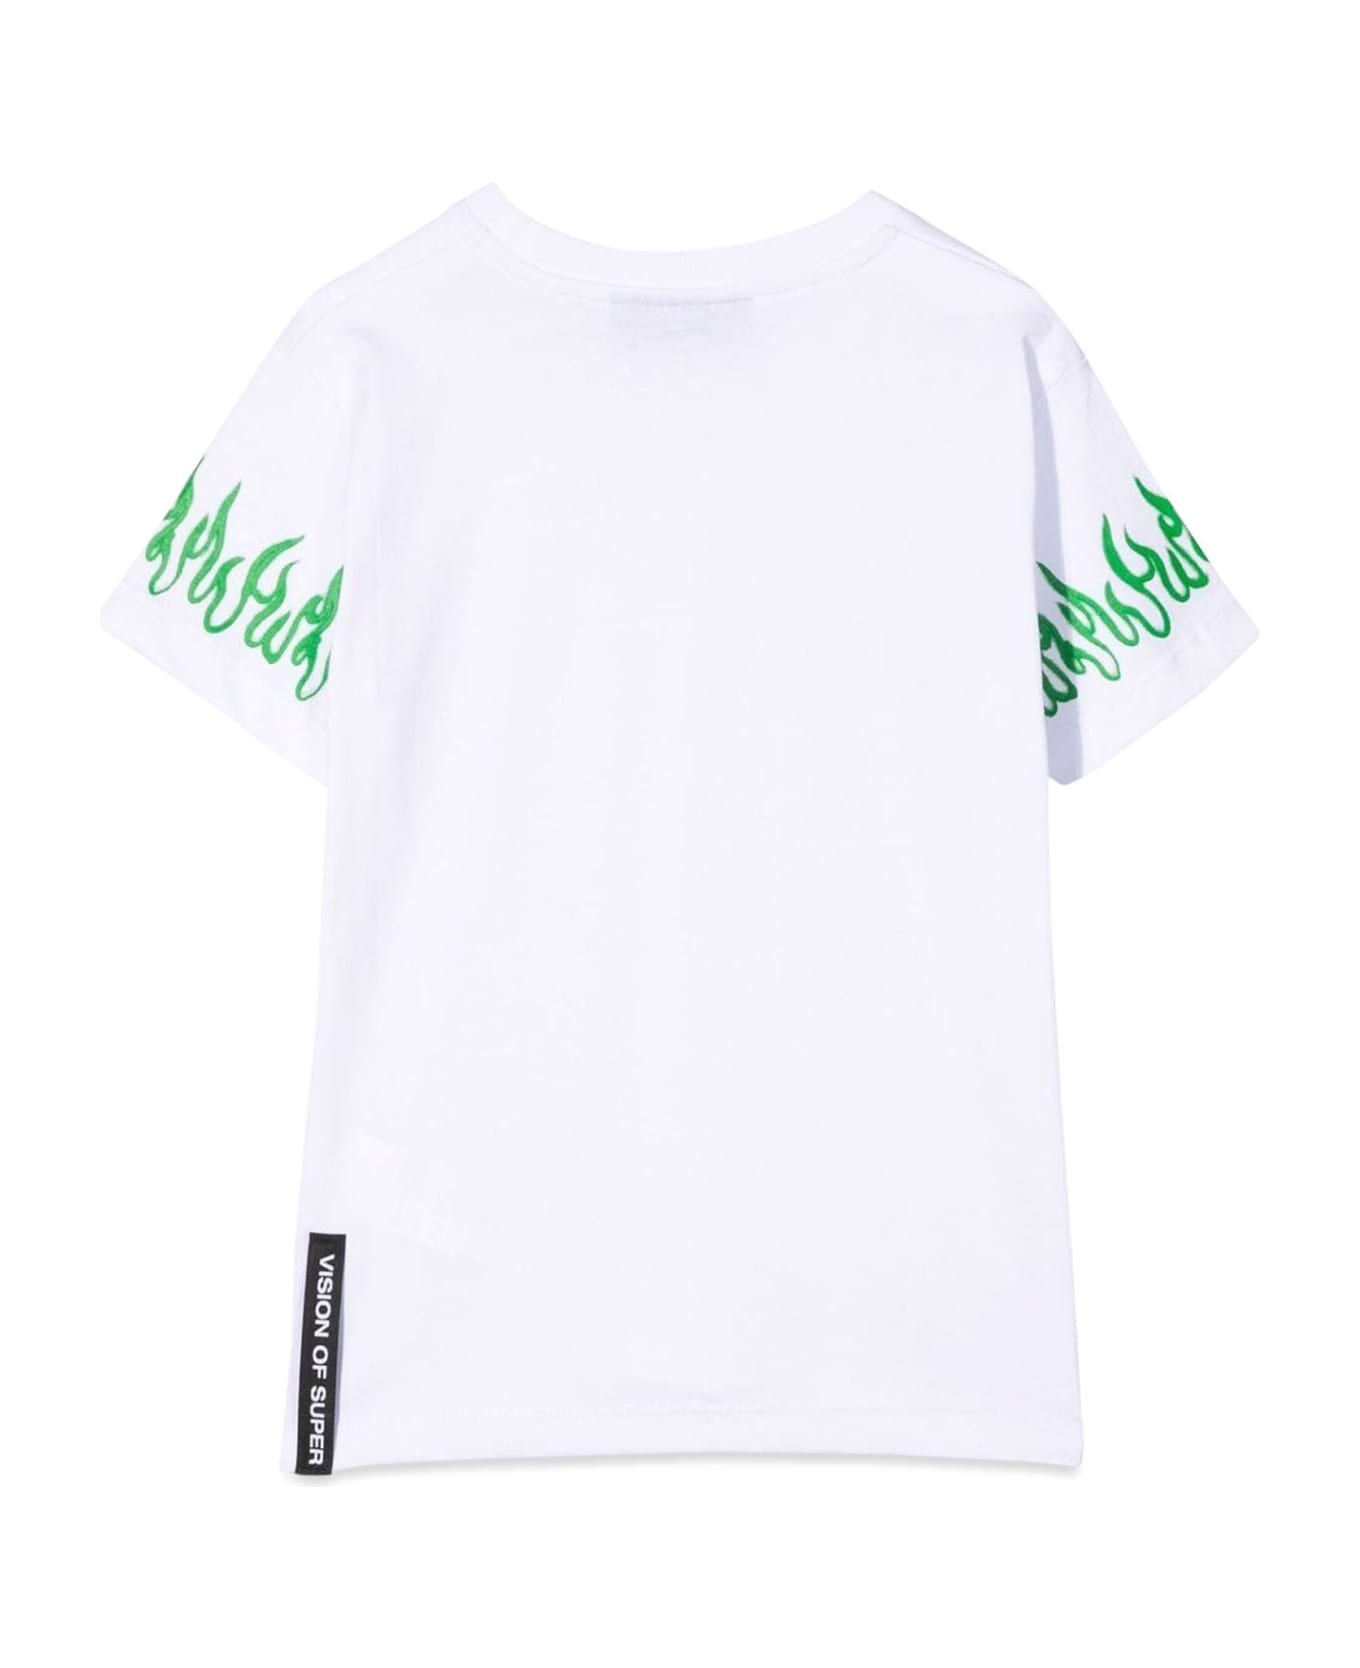 Vision of Super T-shirt With Green Spray Flames - BIANCO